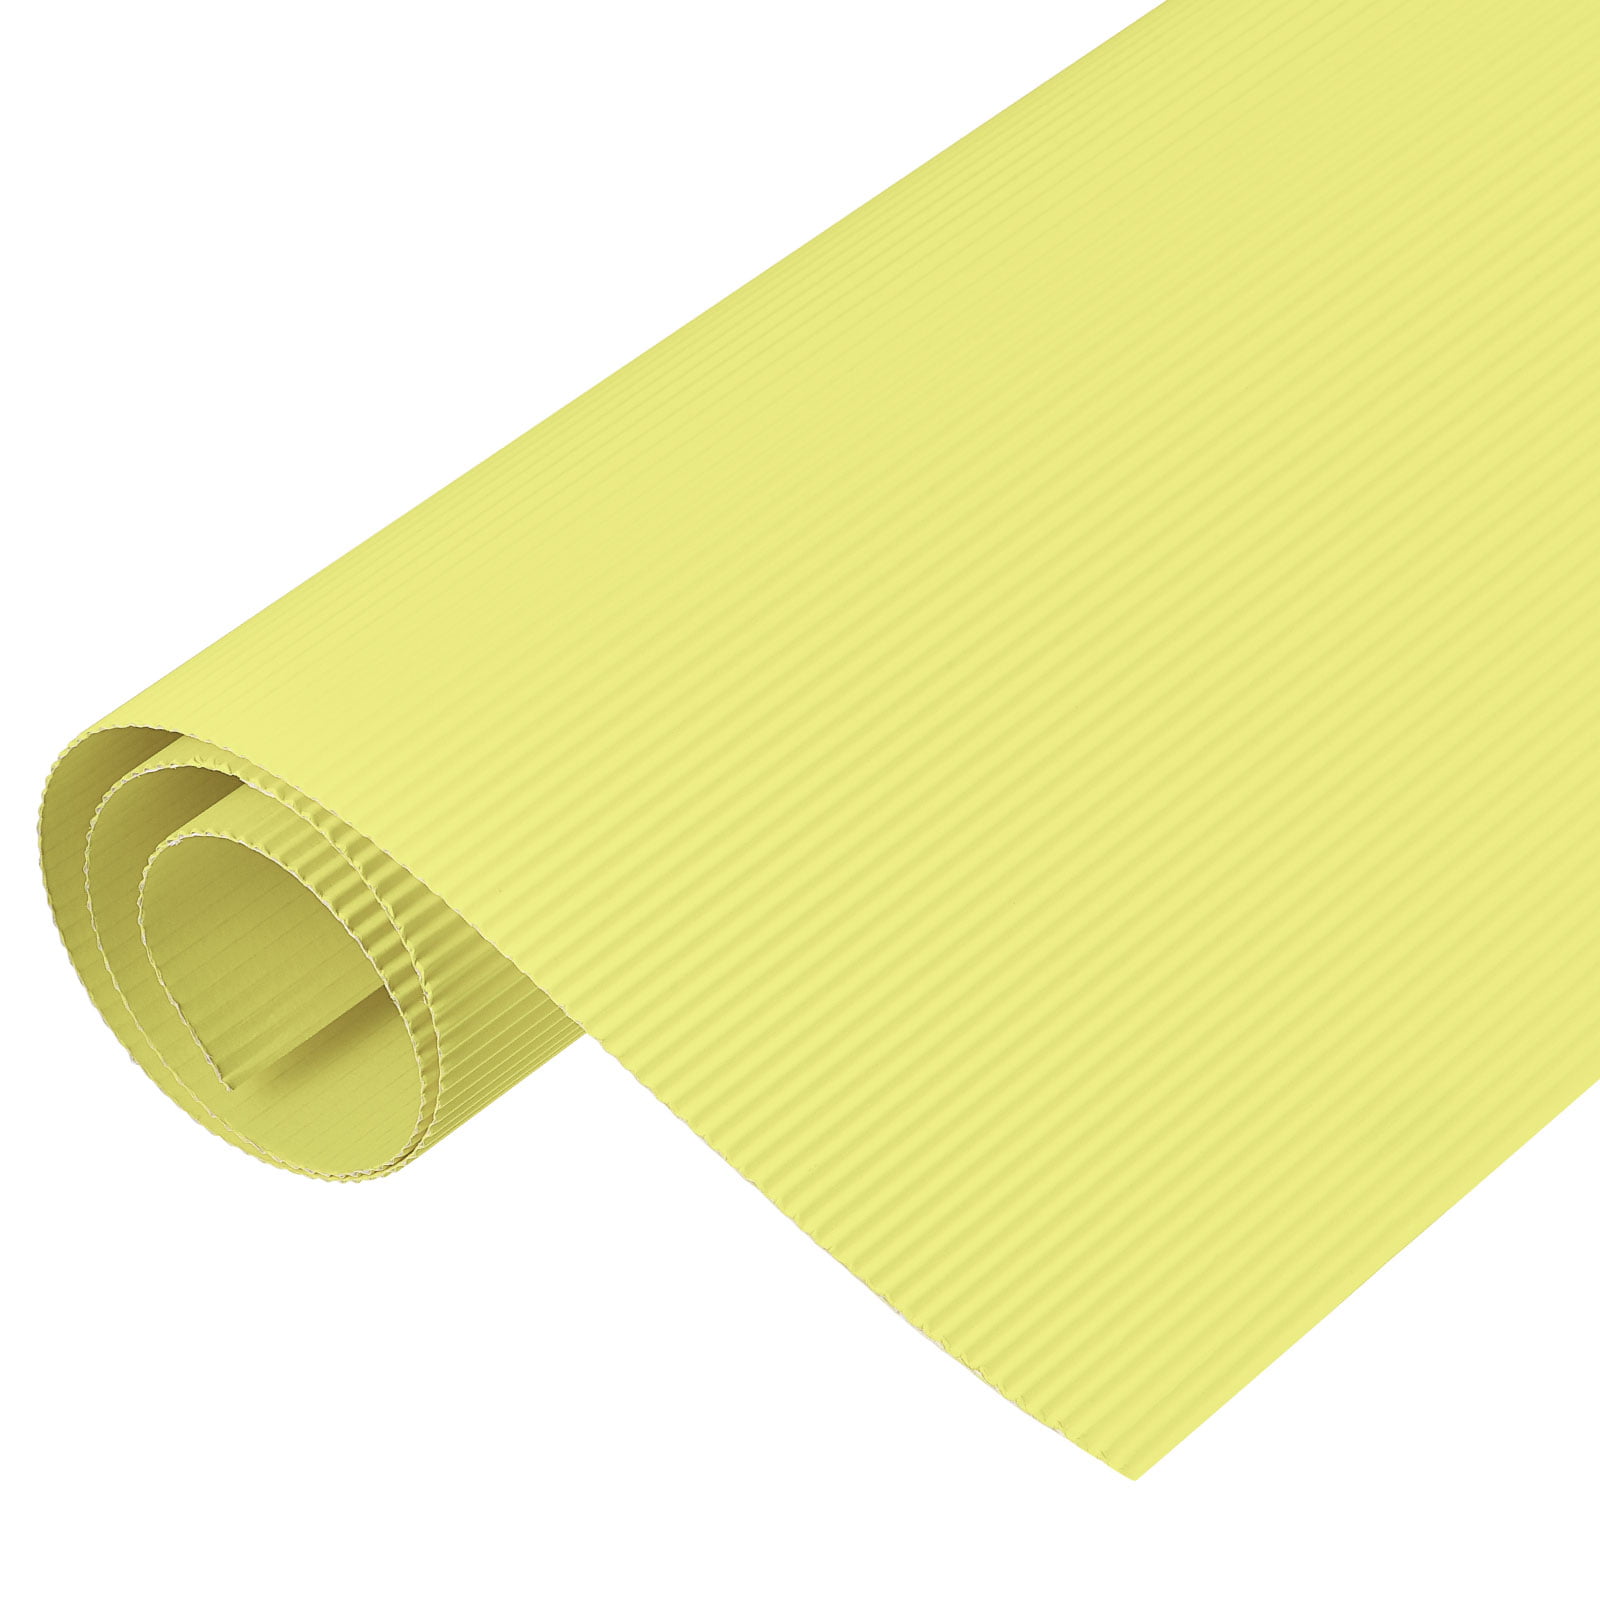 Non-slip sheets from paper or corrugated cardboard